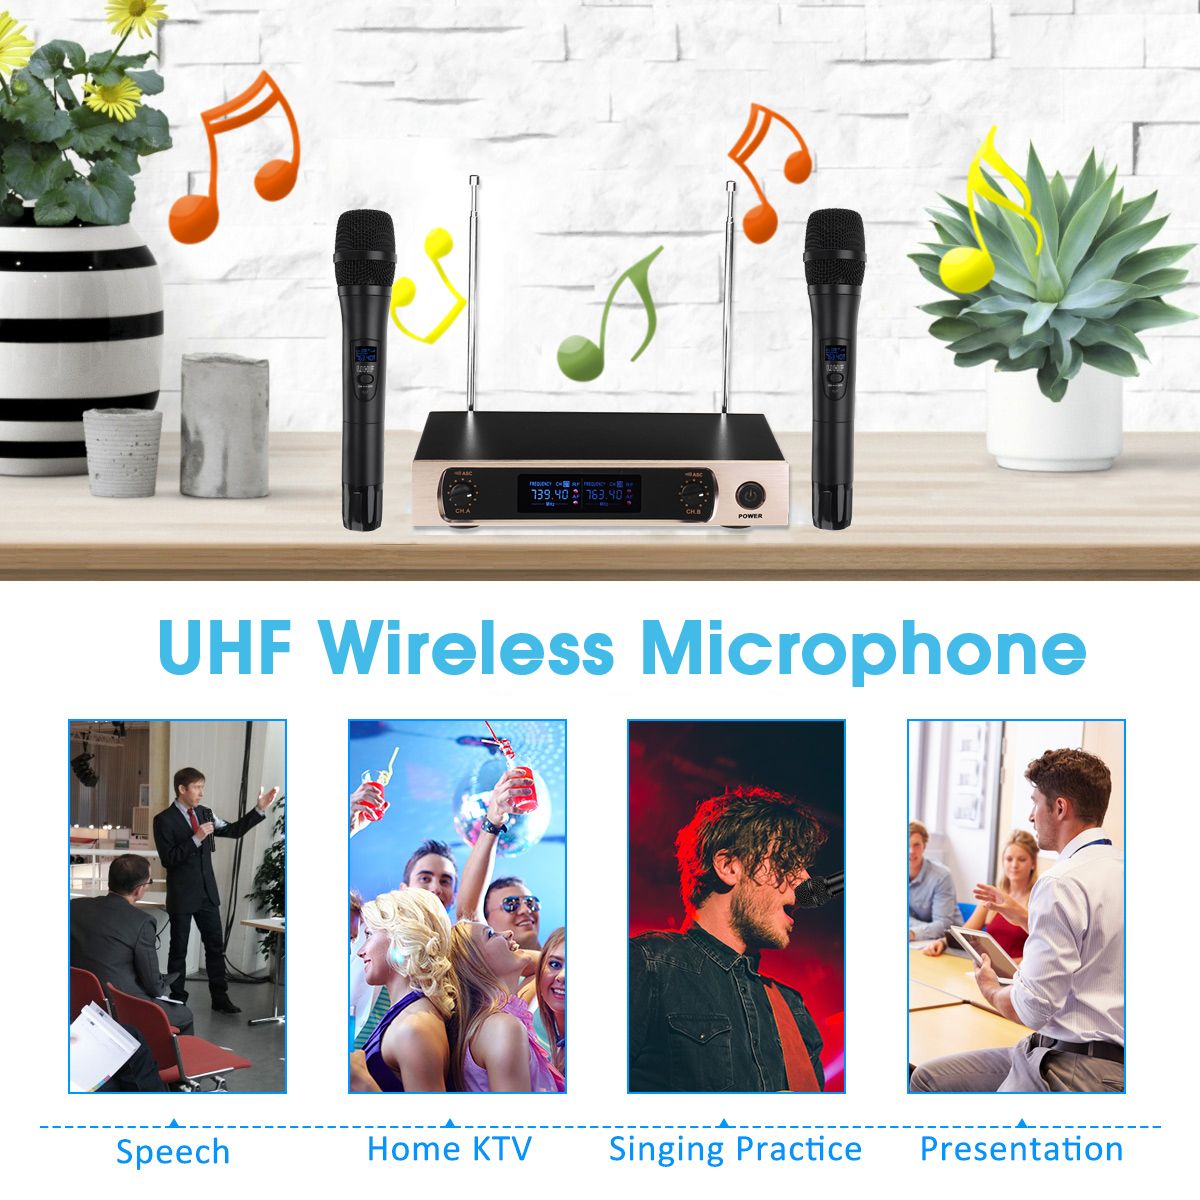 UHF-Wireless-Microphone-System-LCD-Display-Dual-Handheld-Mic-Party-KTV-Cordless-Microphones-1549461